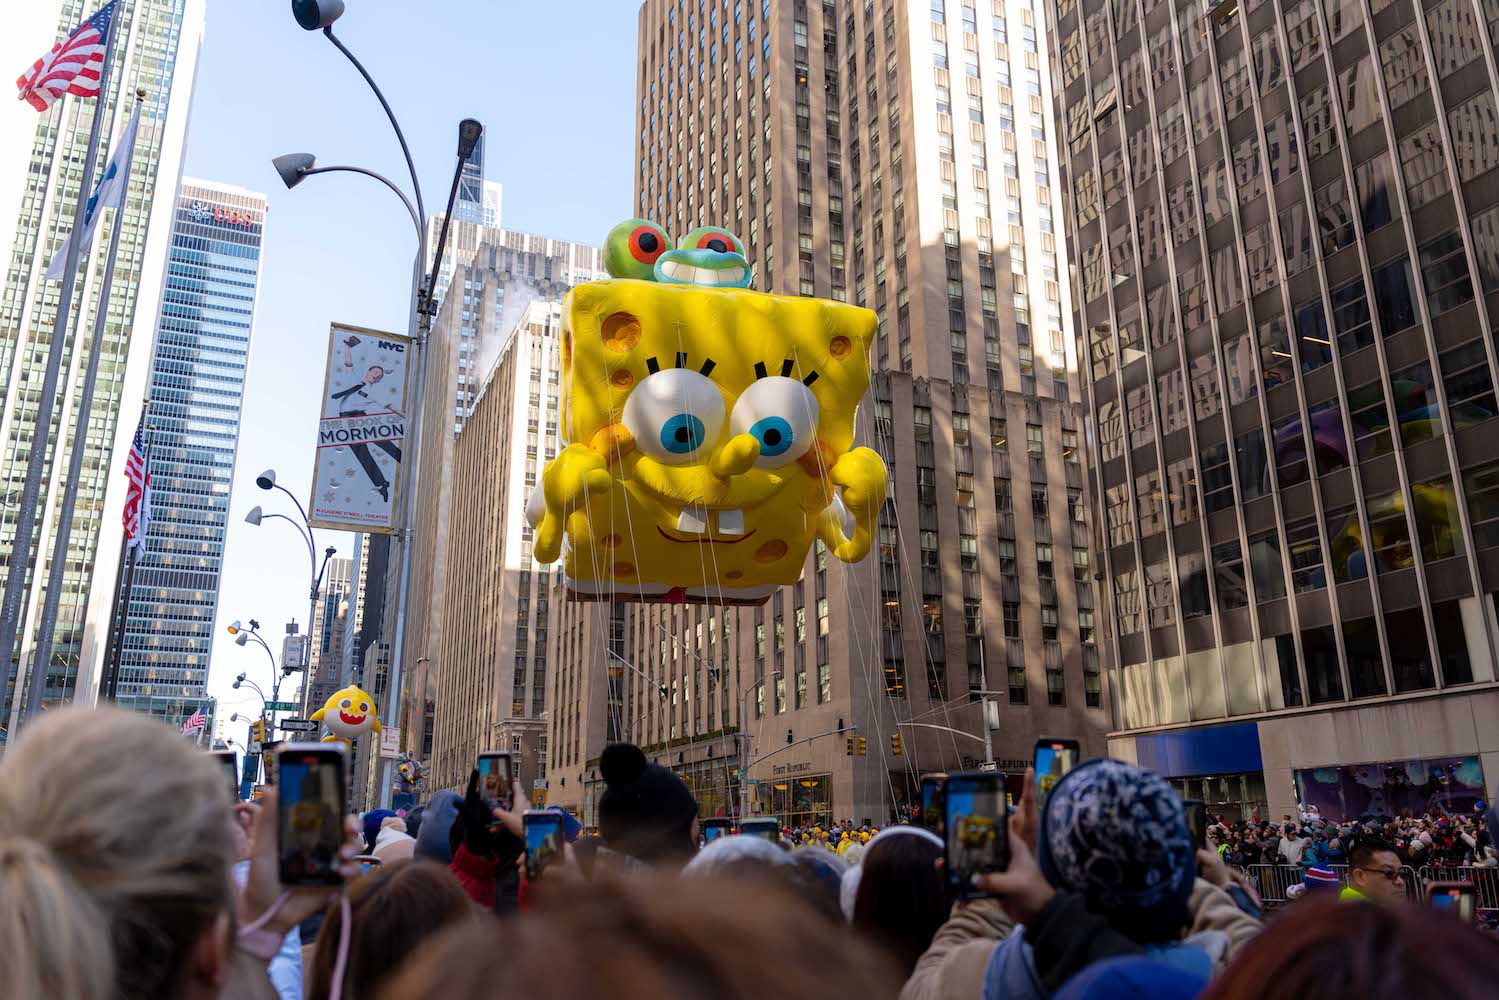 A large balloon in the shape of SpongeBob SquarePants floats above Sixth Avenue in Manhattan while crowds take photos of it with their phones.